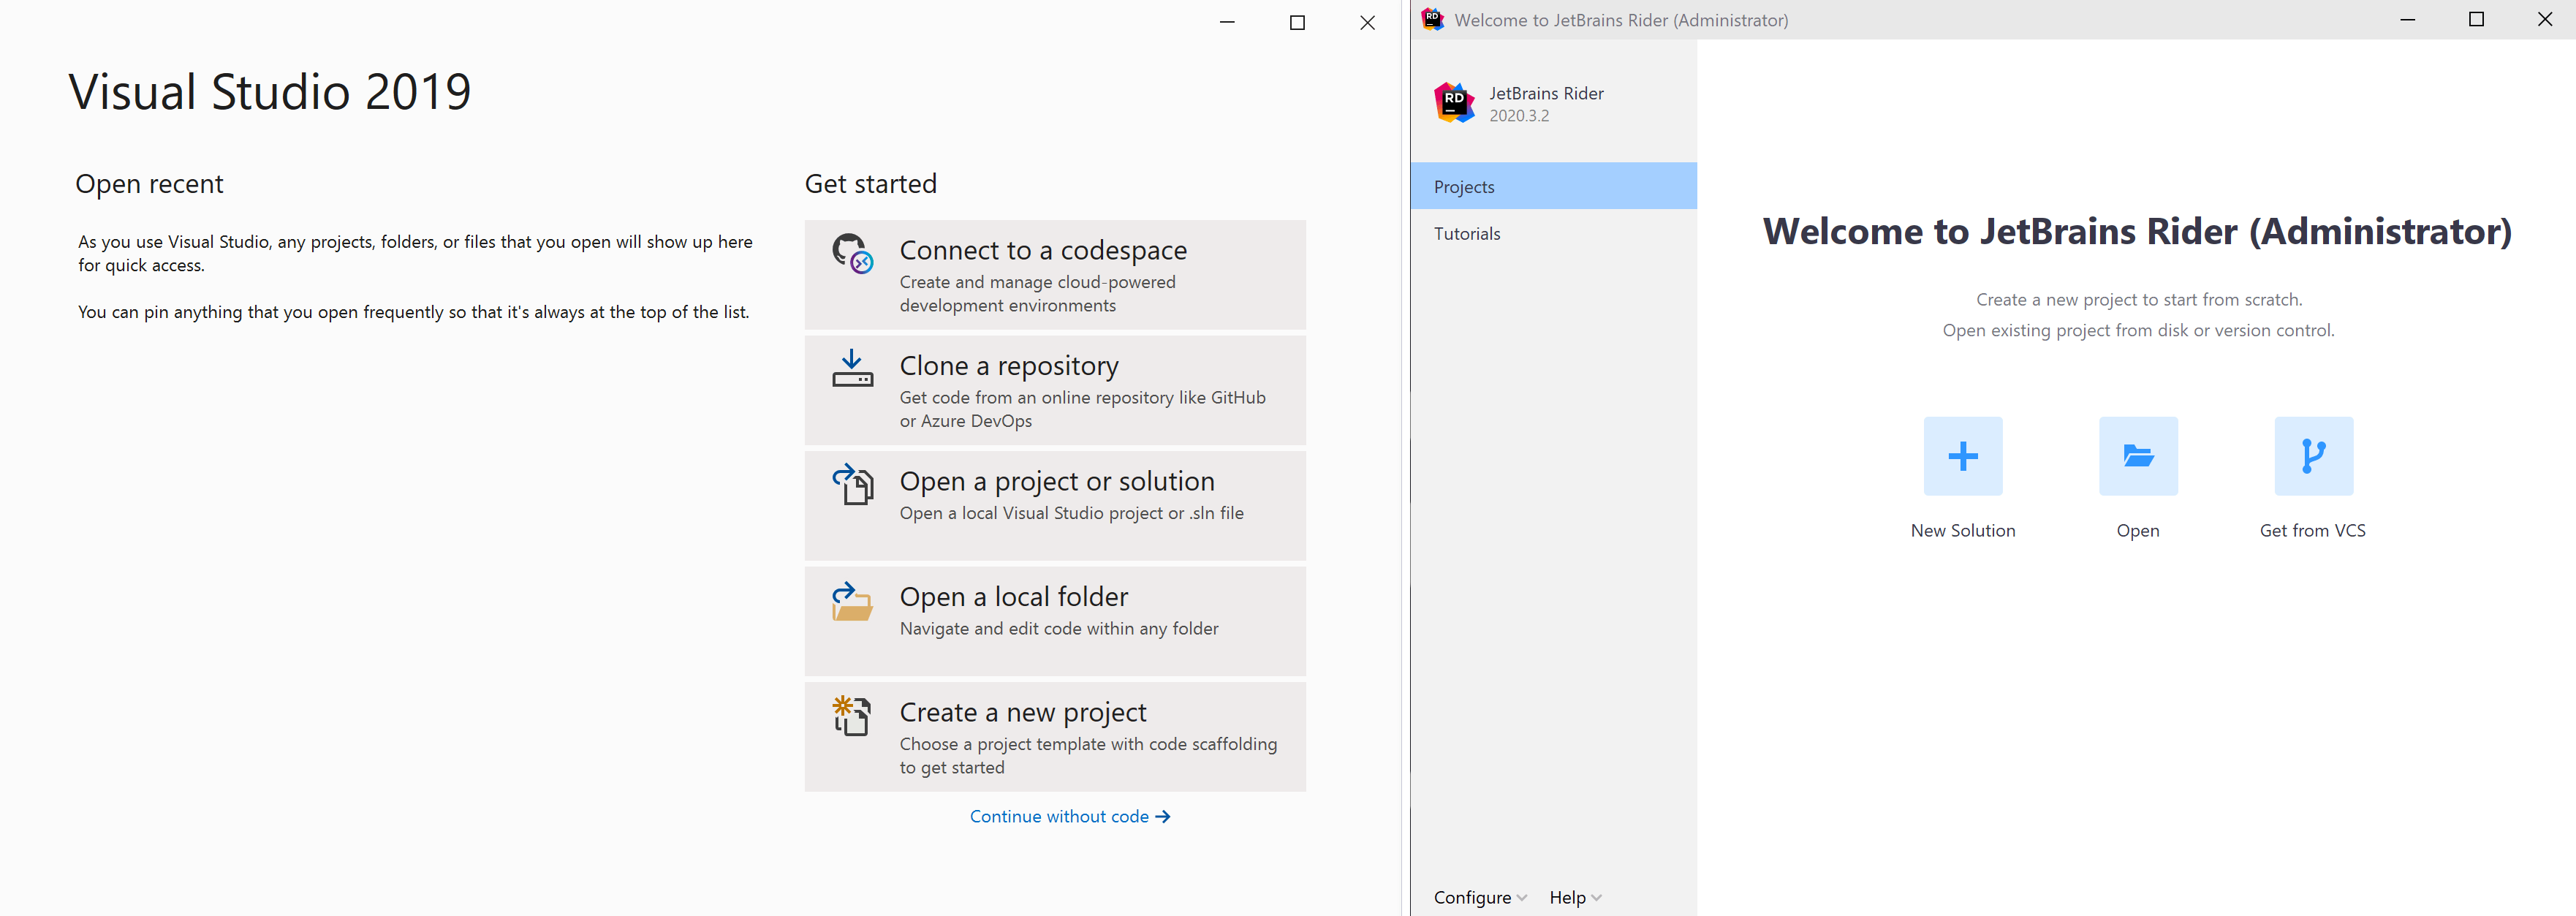 Visual Studio and JetBrains Rider welcome screens